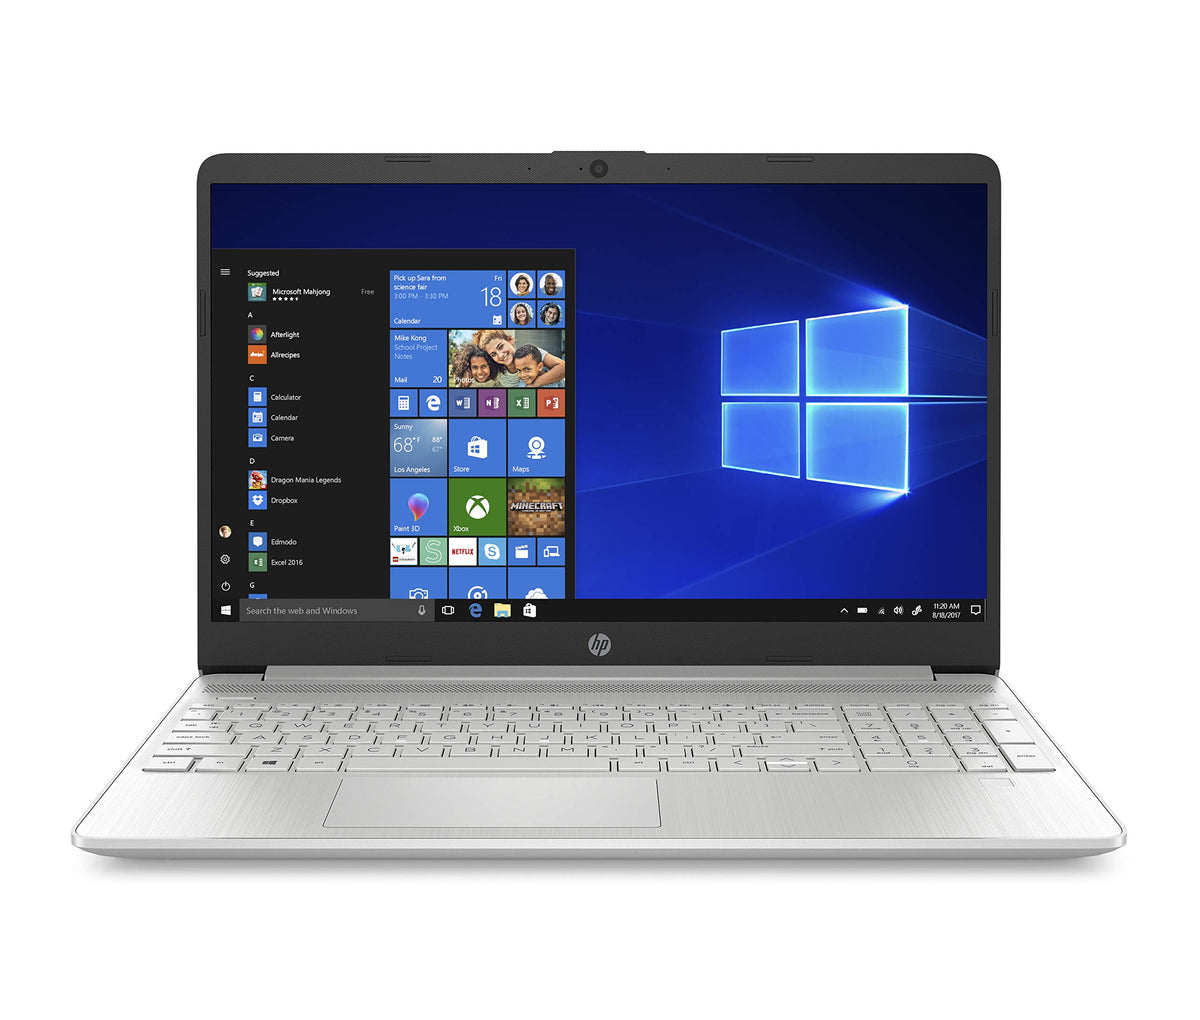 HP 15-Inch HD Touchscreen Laptop, 10th Gen Intel Core i3-1005G1, 4 GB SDRAM, 128 GB Solid-State Drive, Windows 10 Home in S Mode (15-dy1010nr, Natural Silver), 15-15.99 inches